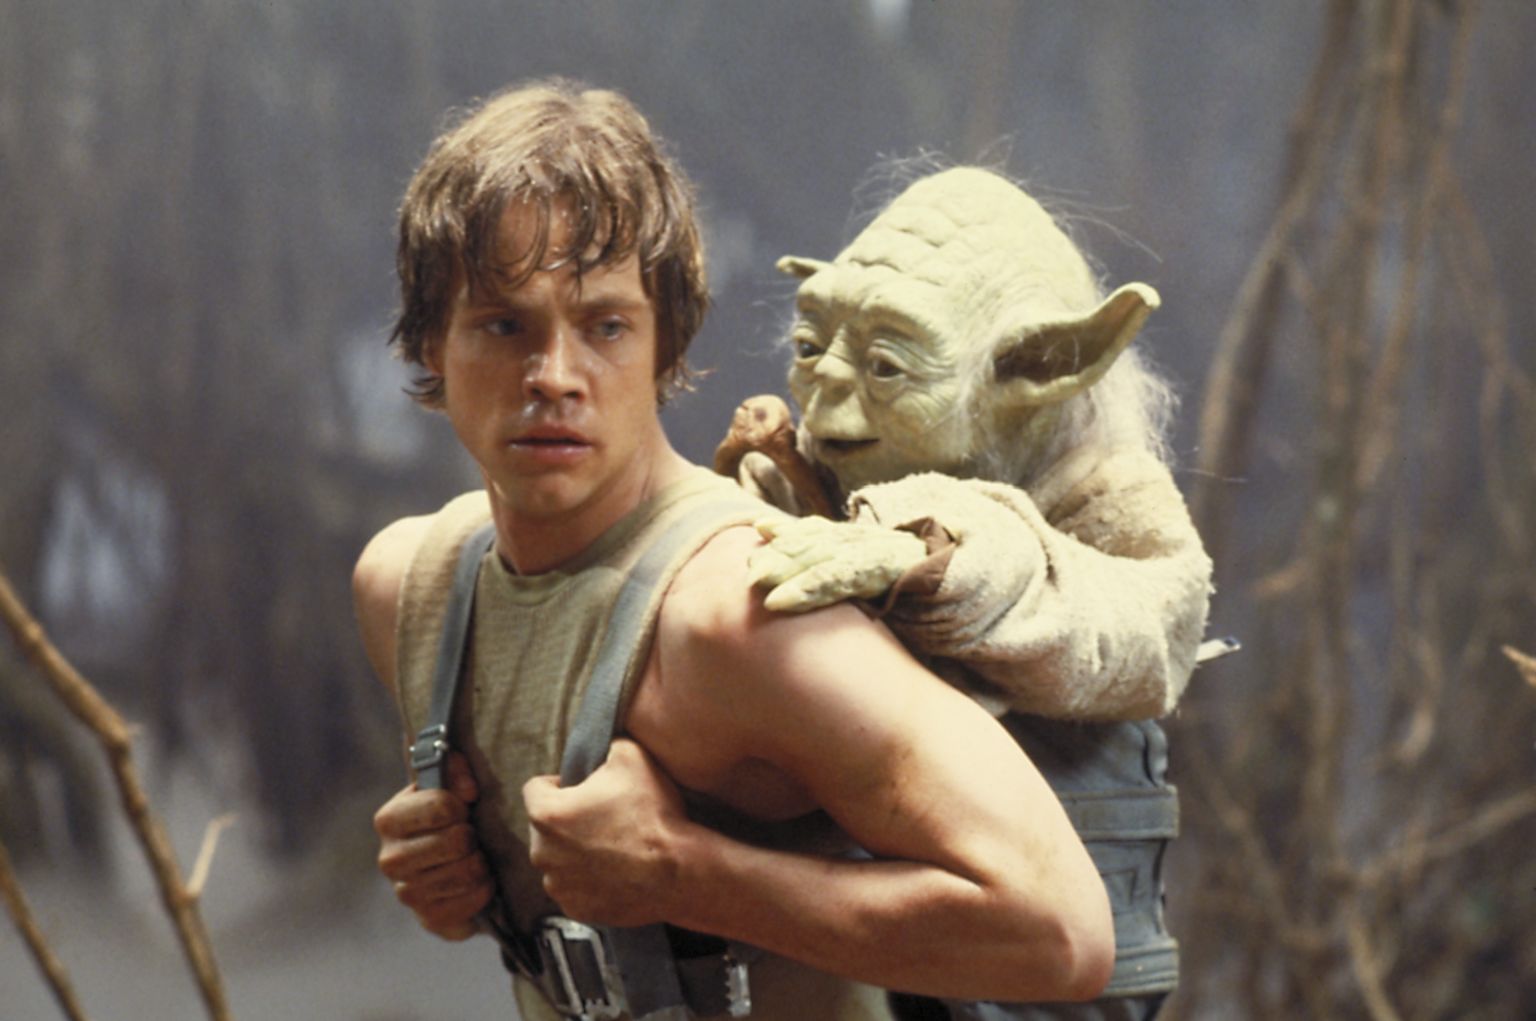 Can You Match These Iconic Quotes to the 🍿Movies They Were Said In? Yoda